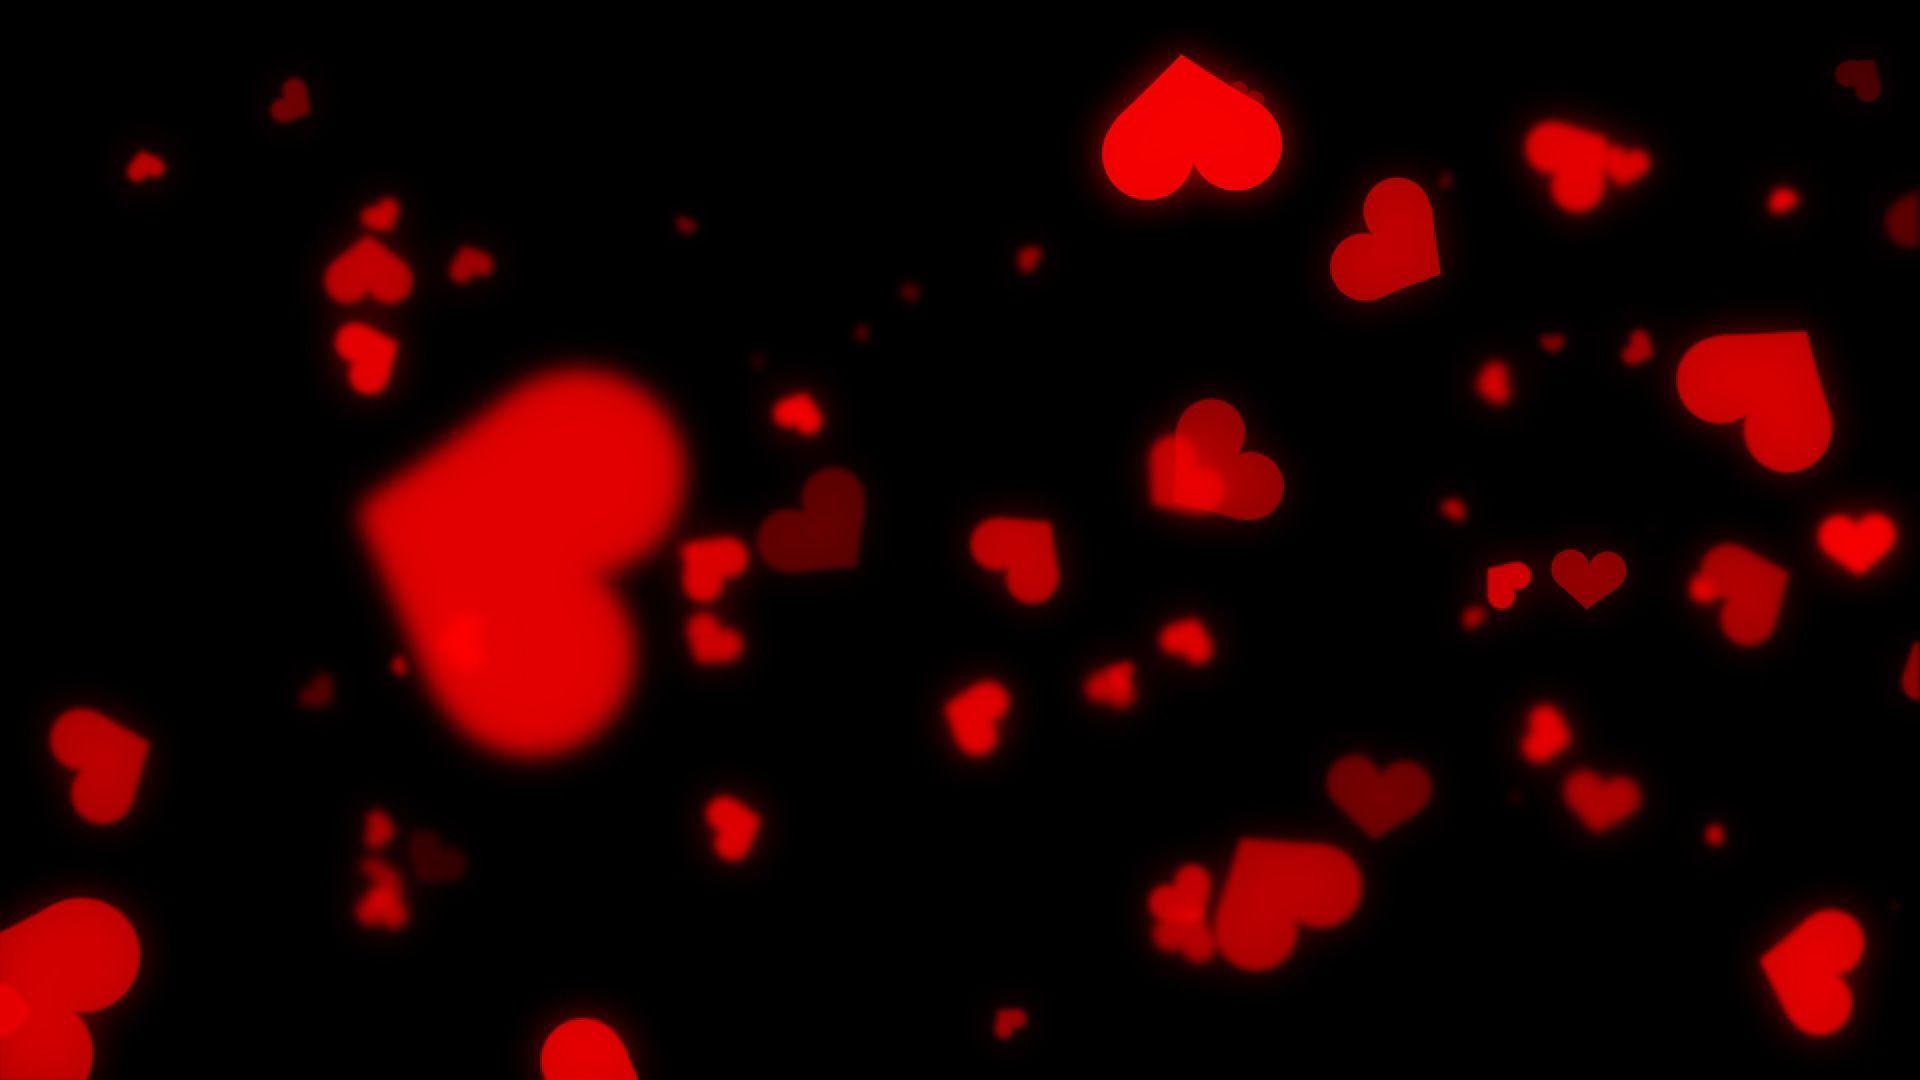 Red hearts on black backgrounds loop ~ Video Clip